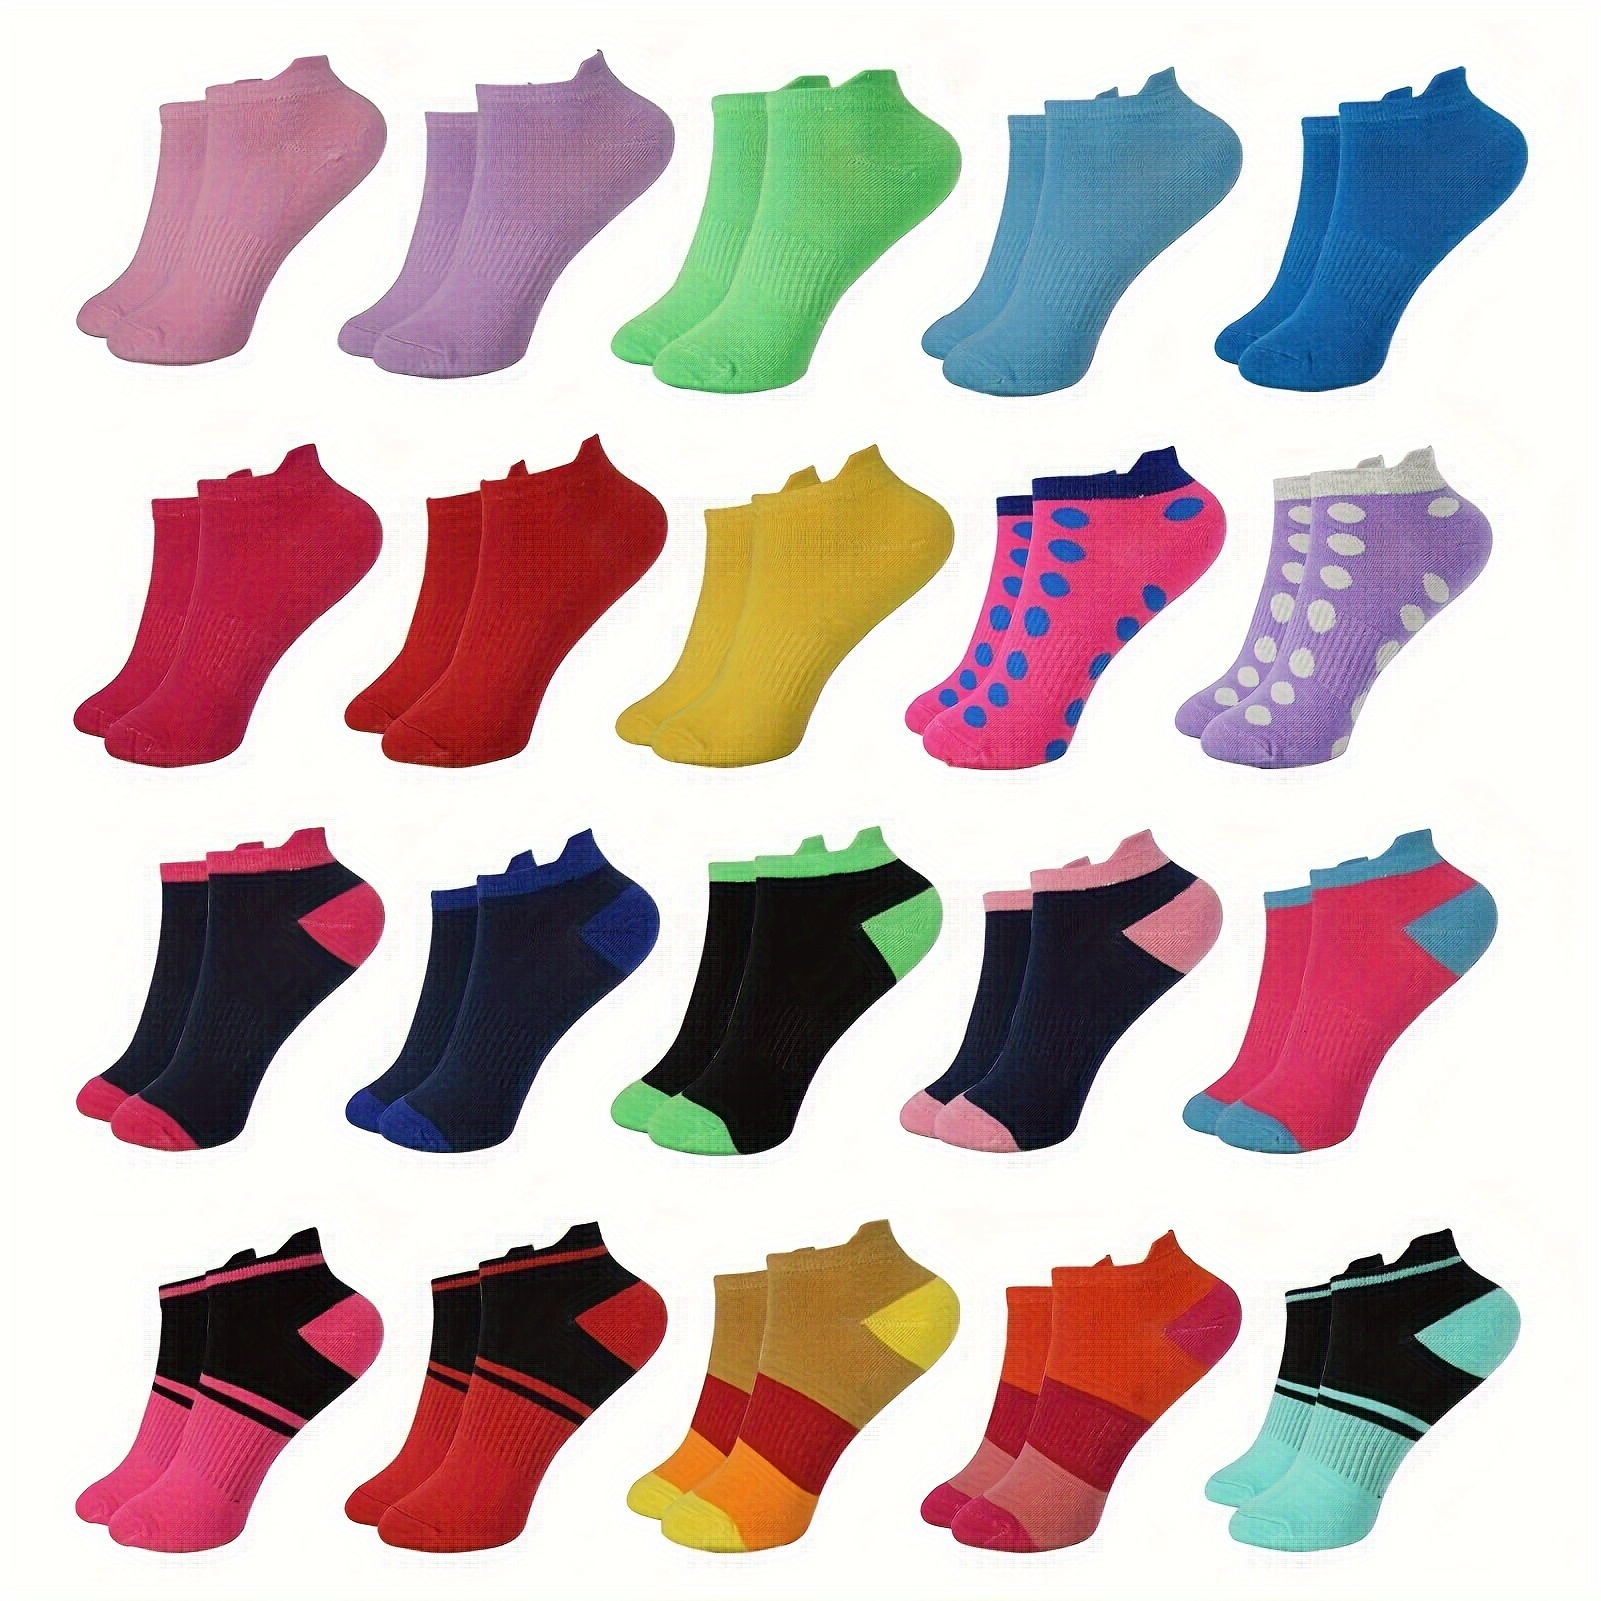 

20 Pairs Women Low Cut Ankle Socks Athletic Socks No Show Colorful Socks For Running Workout Sports